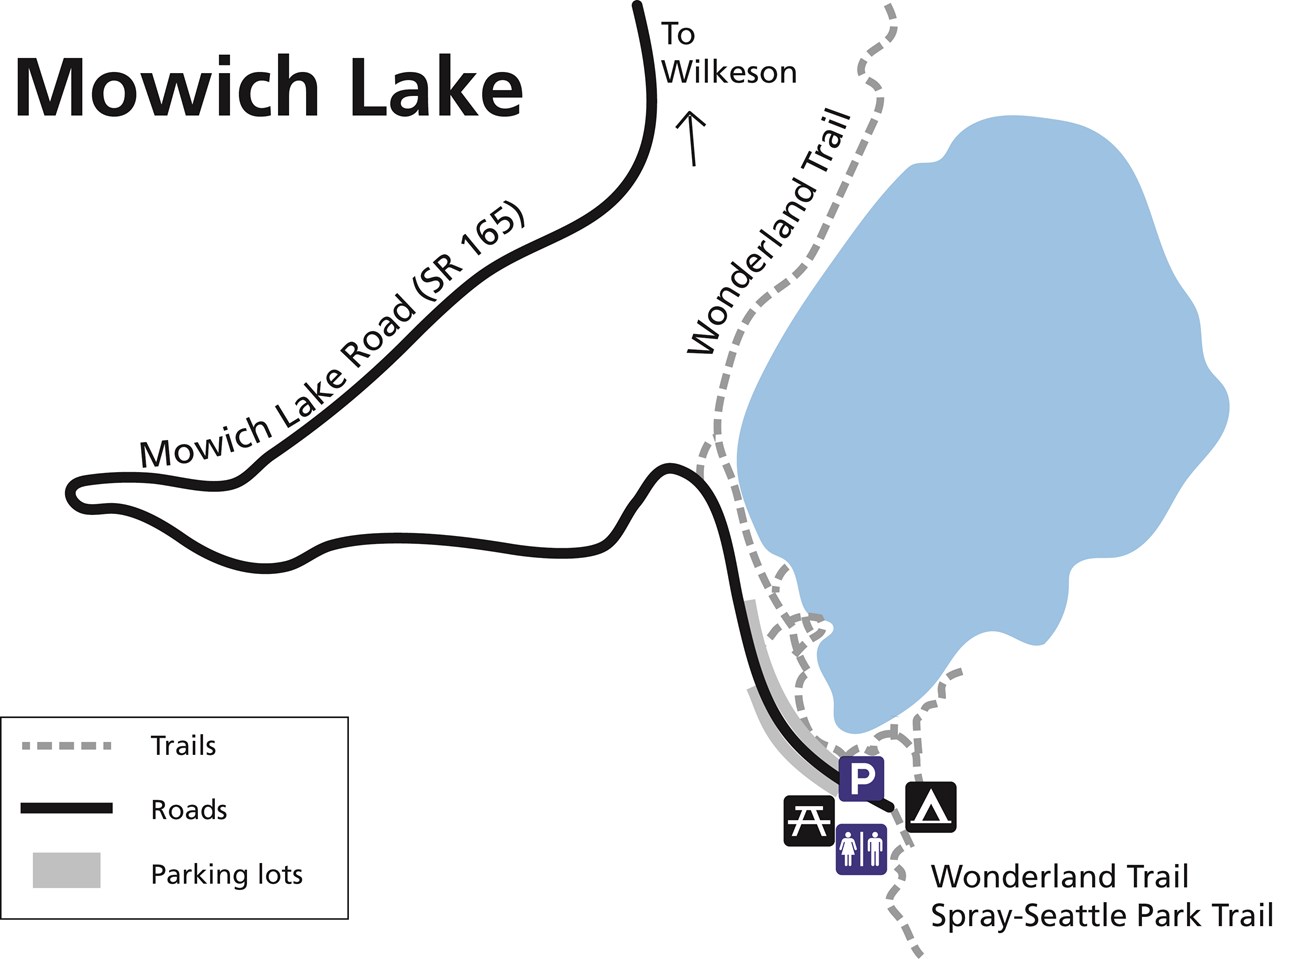 Simplified map of the accessible features at Mowich Lake.